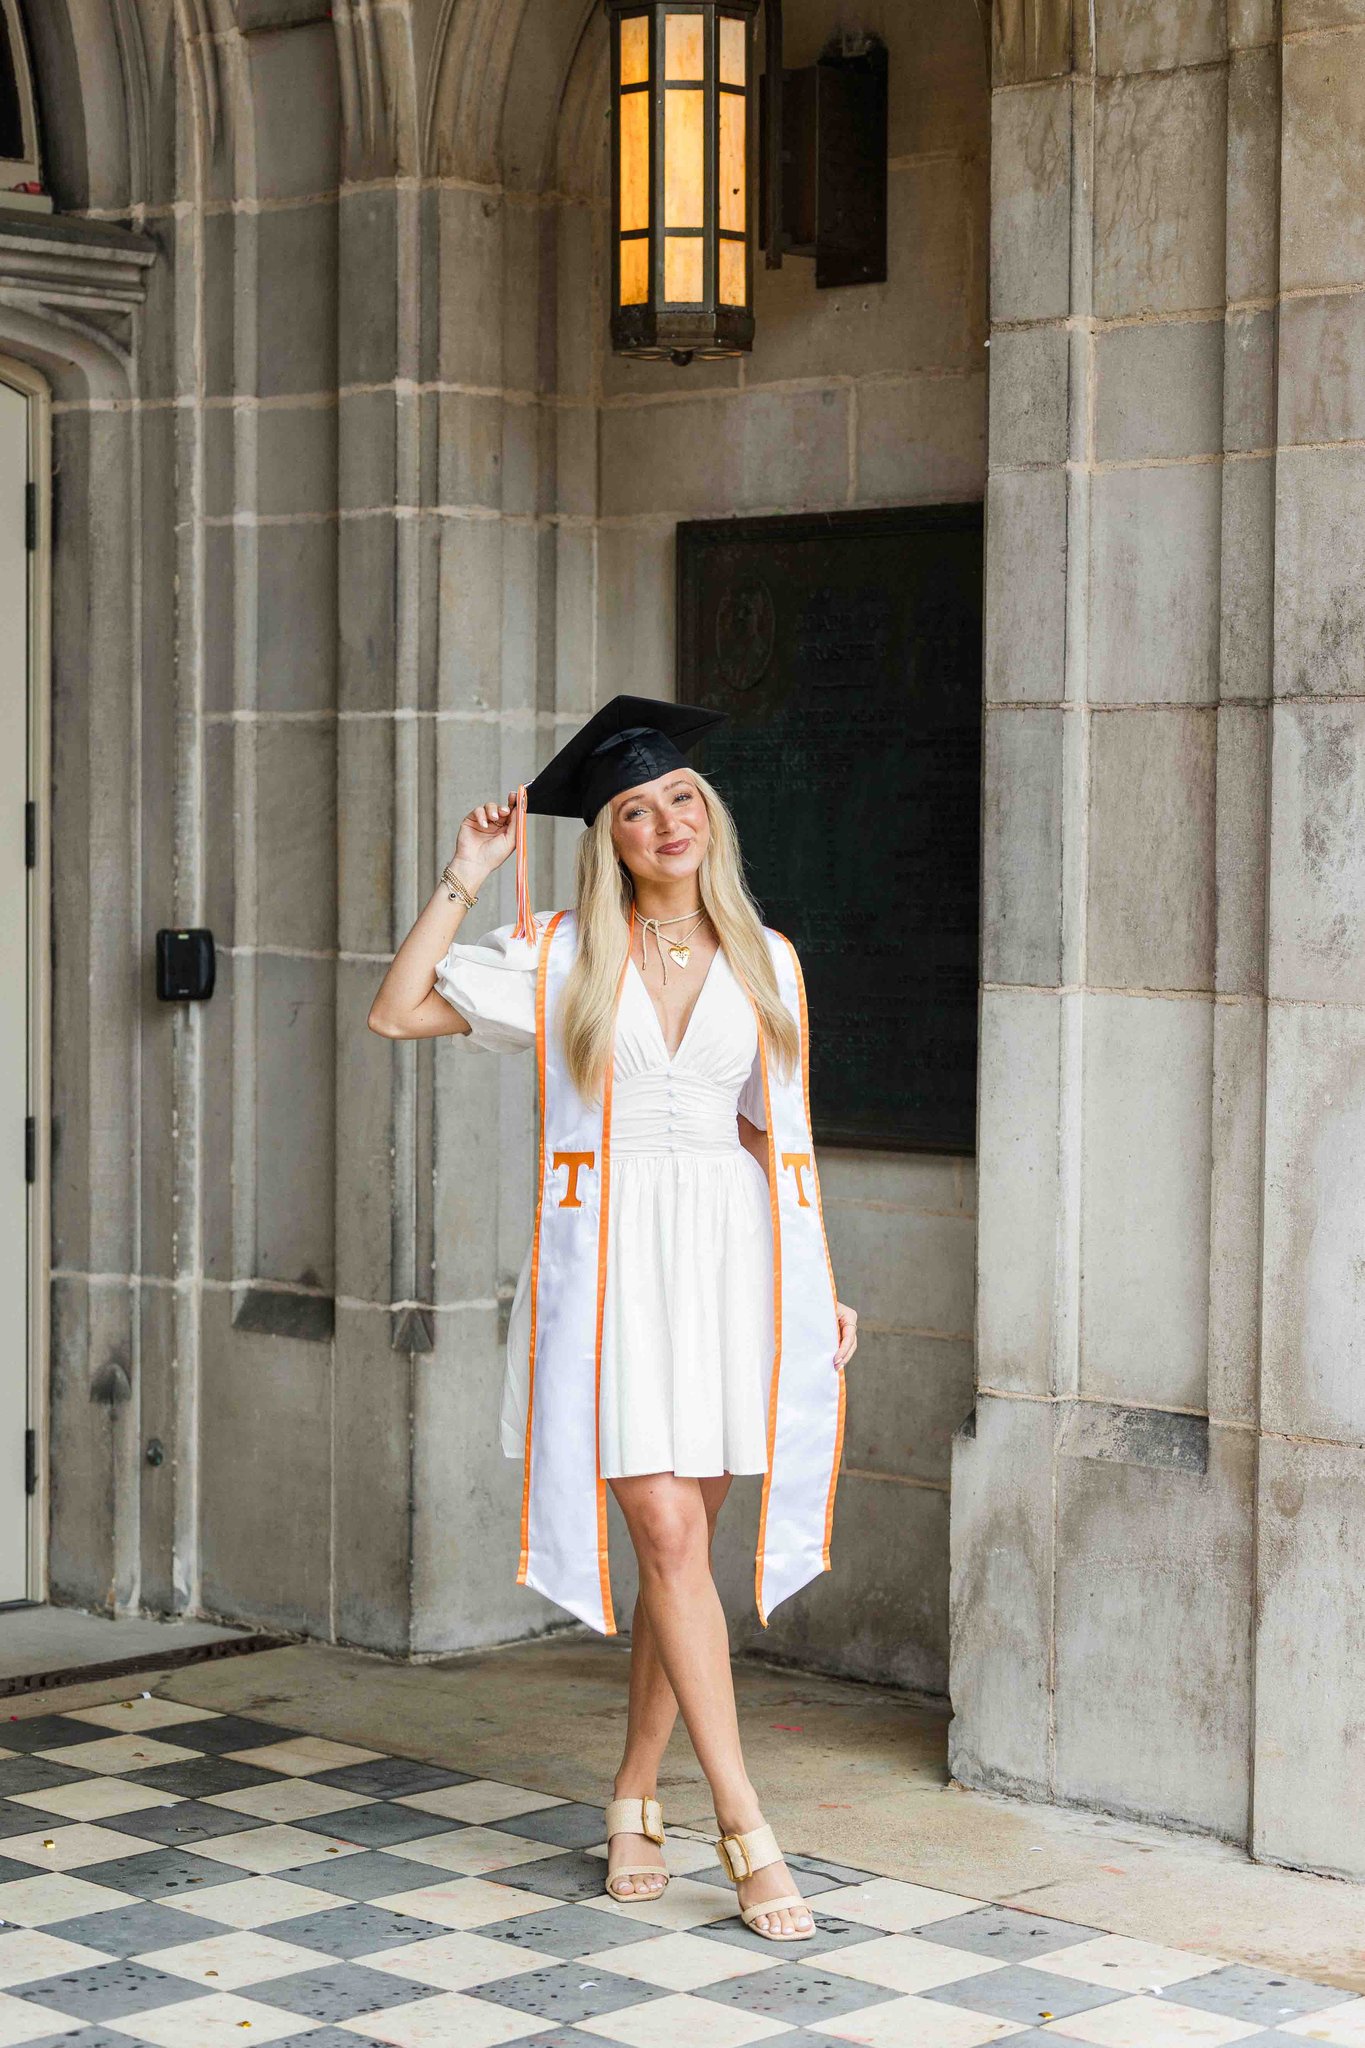 A graduate in a white dress tips her cap while standing in a stone hallway wearing her orange and white stole